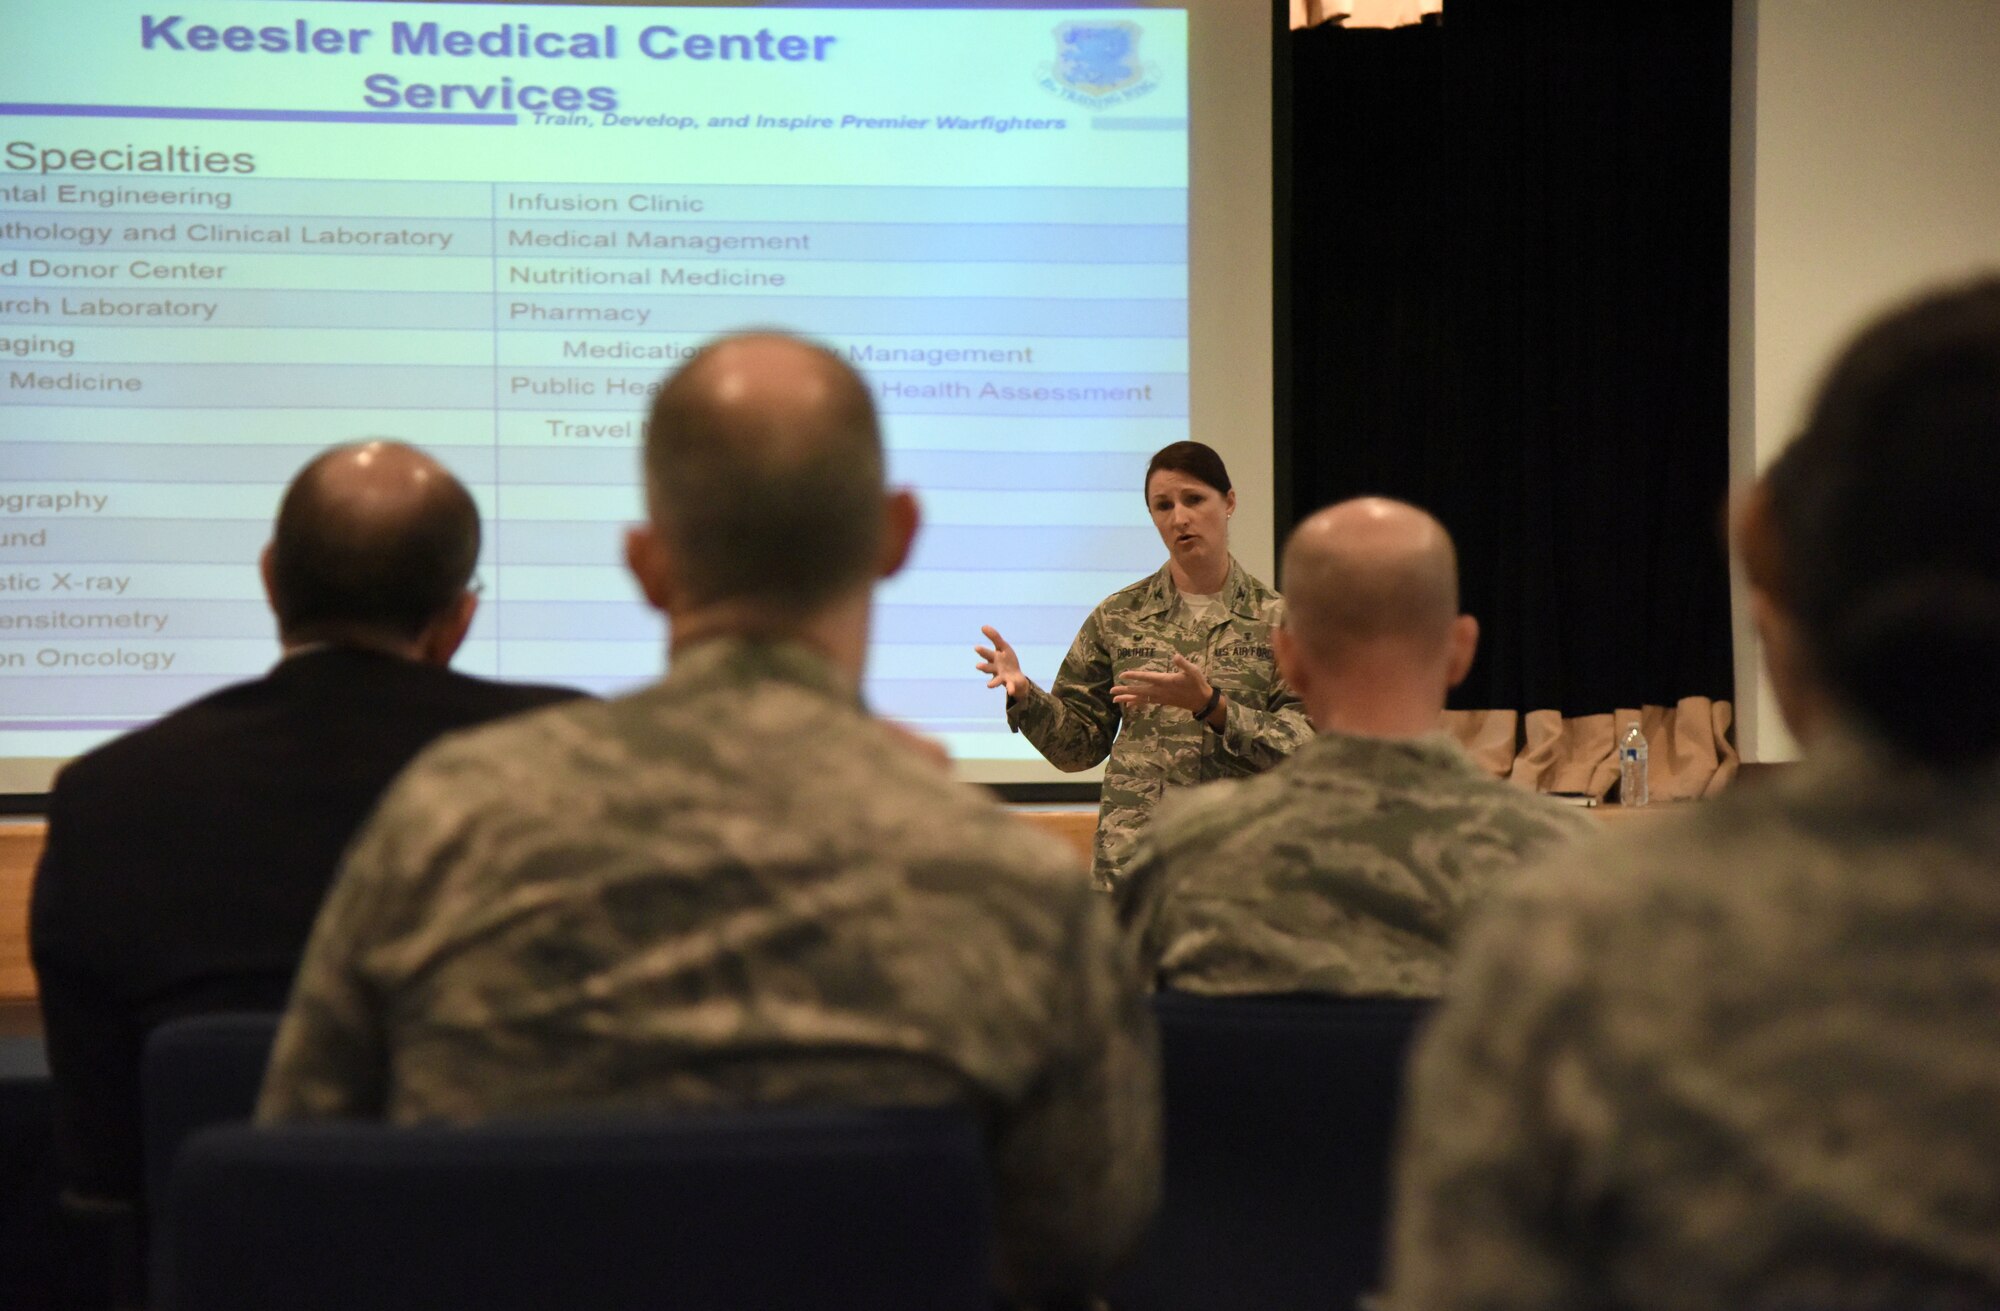 U.S. Air Force Col. Beatrice Dolihite, 81st Medical Group director and service commander, delivers the 81st MDG mission brief to Gen. Stephen Wilson, Vice Chief of Staff of the Air Force; Matthew Donovan, Under Secretary of the Air Force; Lt. Gen. Dorothy Hogg, Air Force Surgeon General, and Keesler Leadership at the Keesler Medical Center auditorium at Keesler Air Force Base, Mississippi, Sept. 10, 2018. The purpose of the visit was to become more familiar with the 81st MDG's mission capabilities prior to Keesler Medical Center's transition to the Defense Health Agency. (U.S. Air Force photo by Kemberly Groue)